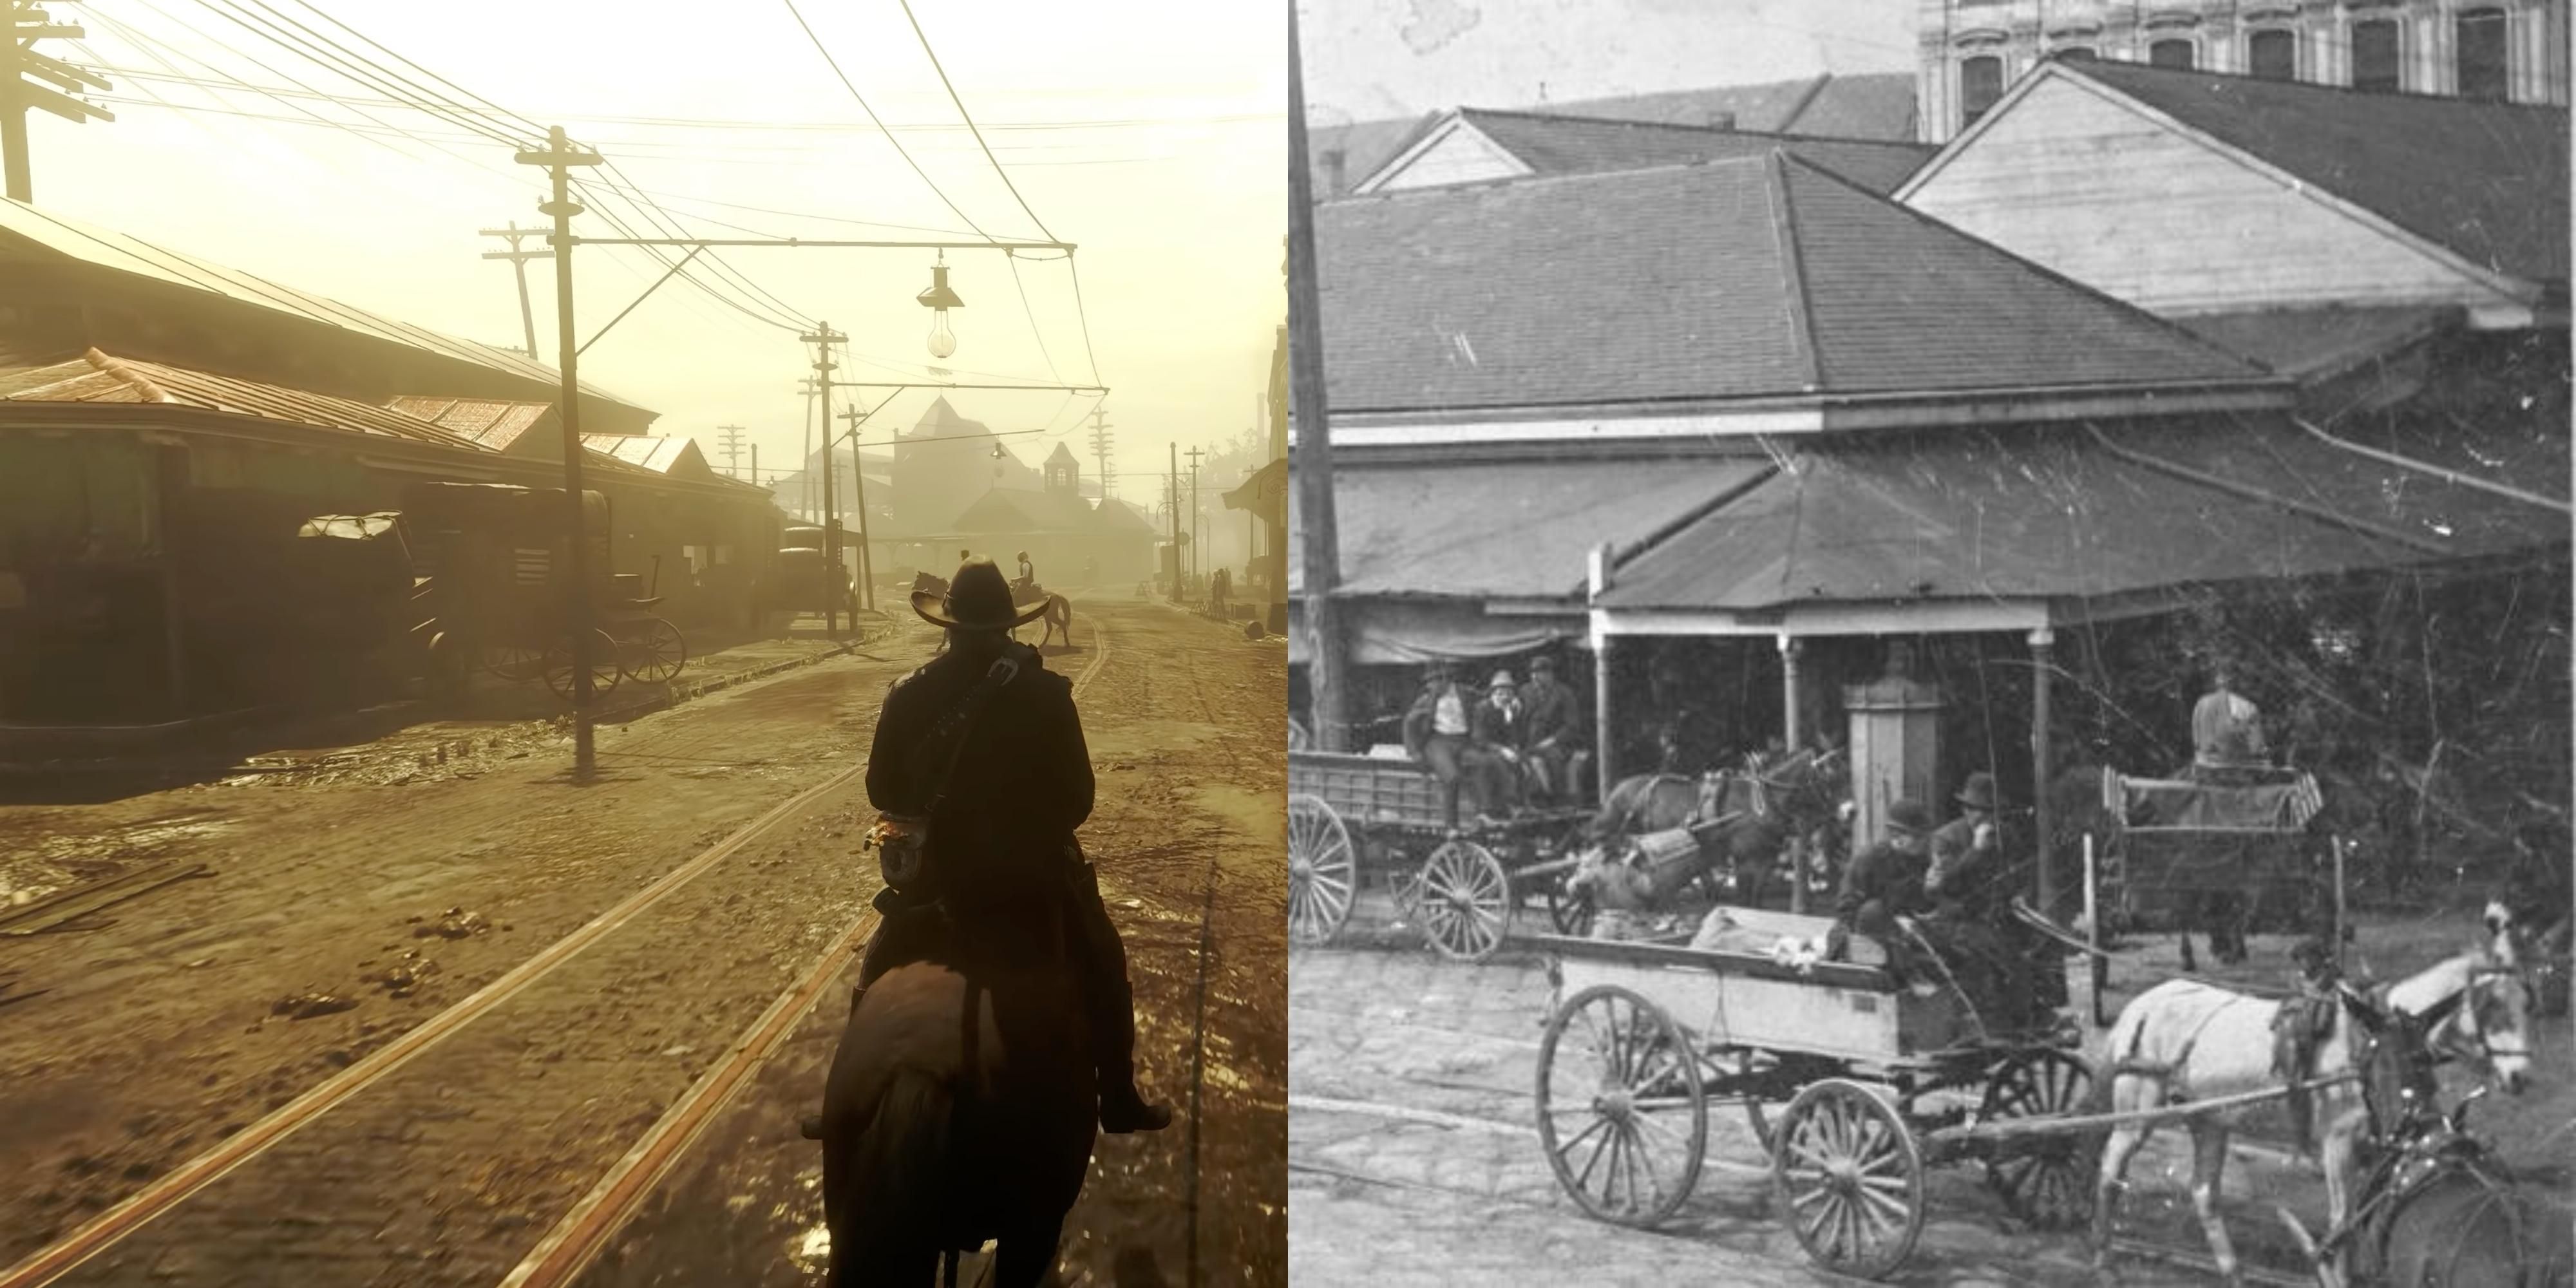 Side by side comparison between RDR2 Saint Denis and New Orlean's markets 1890s